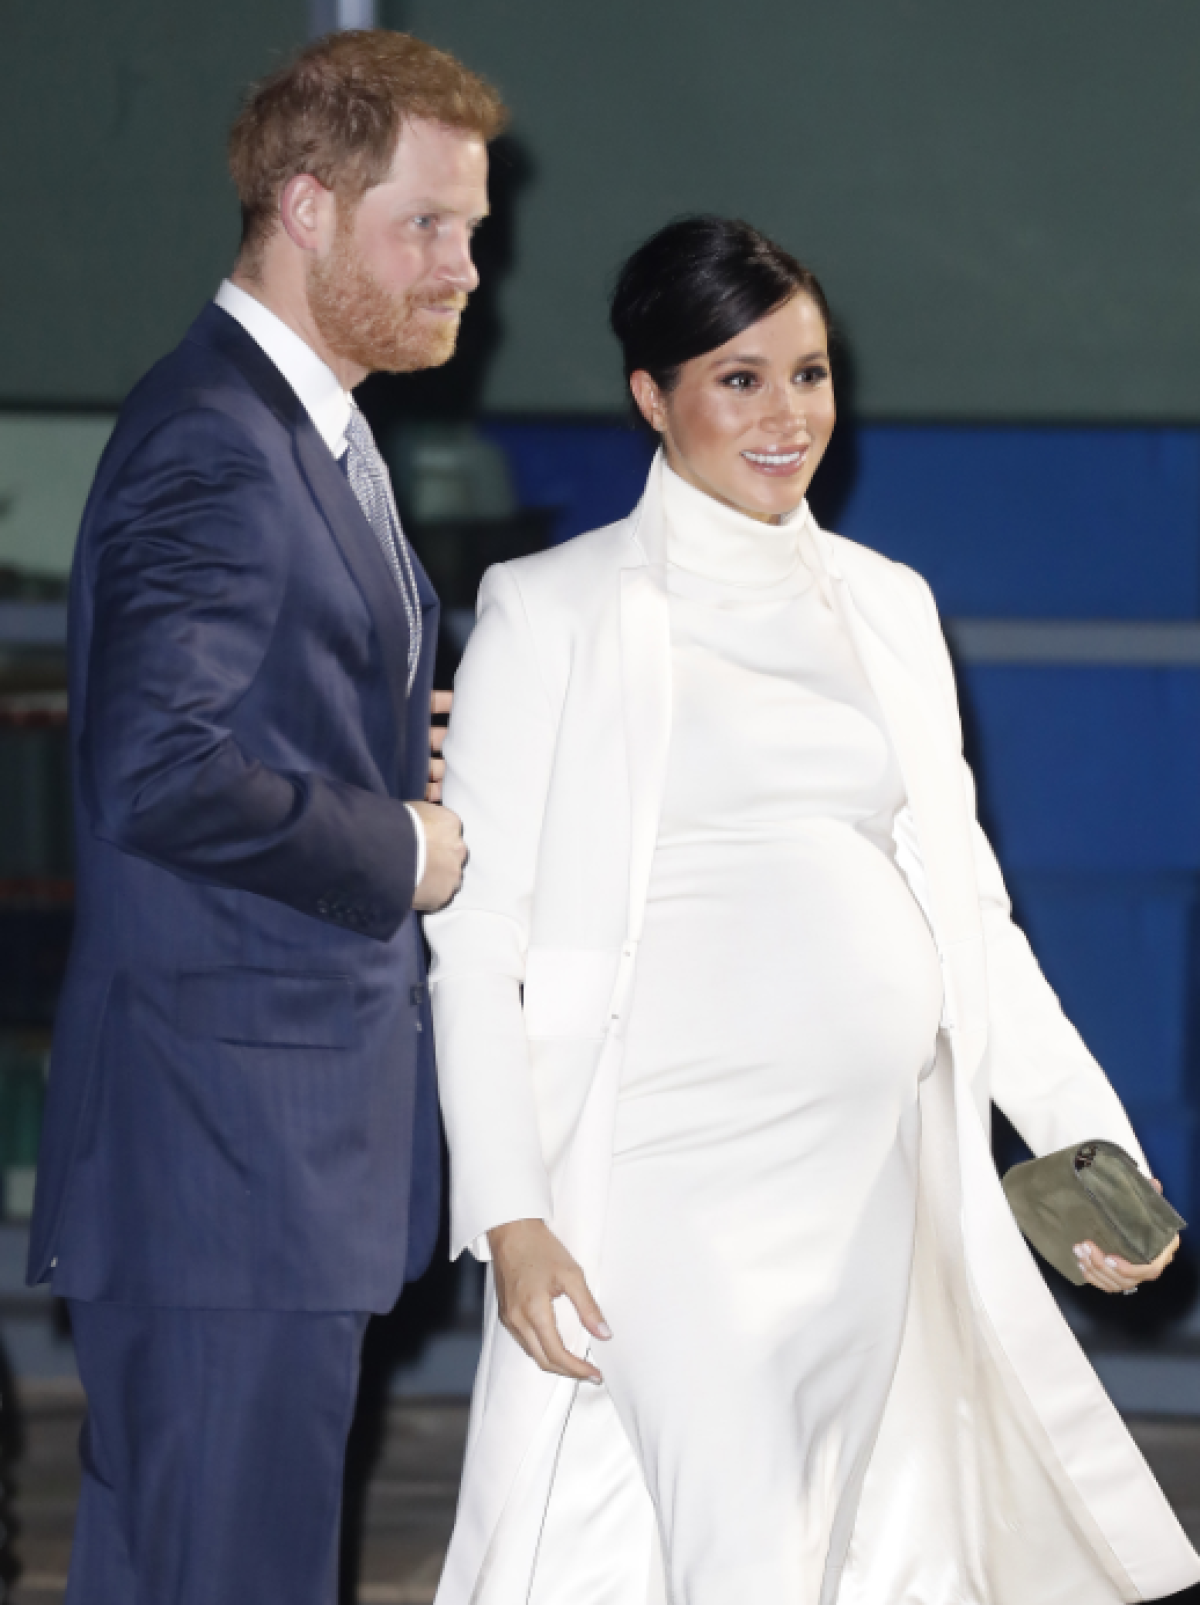 Pregnant Meghan Markle Shows Off Growing Baby Bump at Natural History Museum Gala